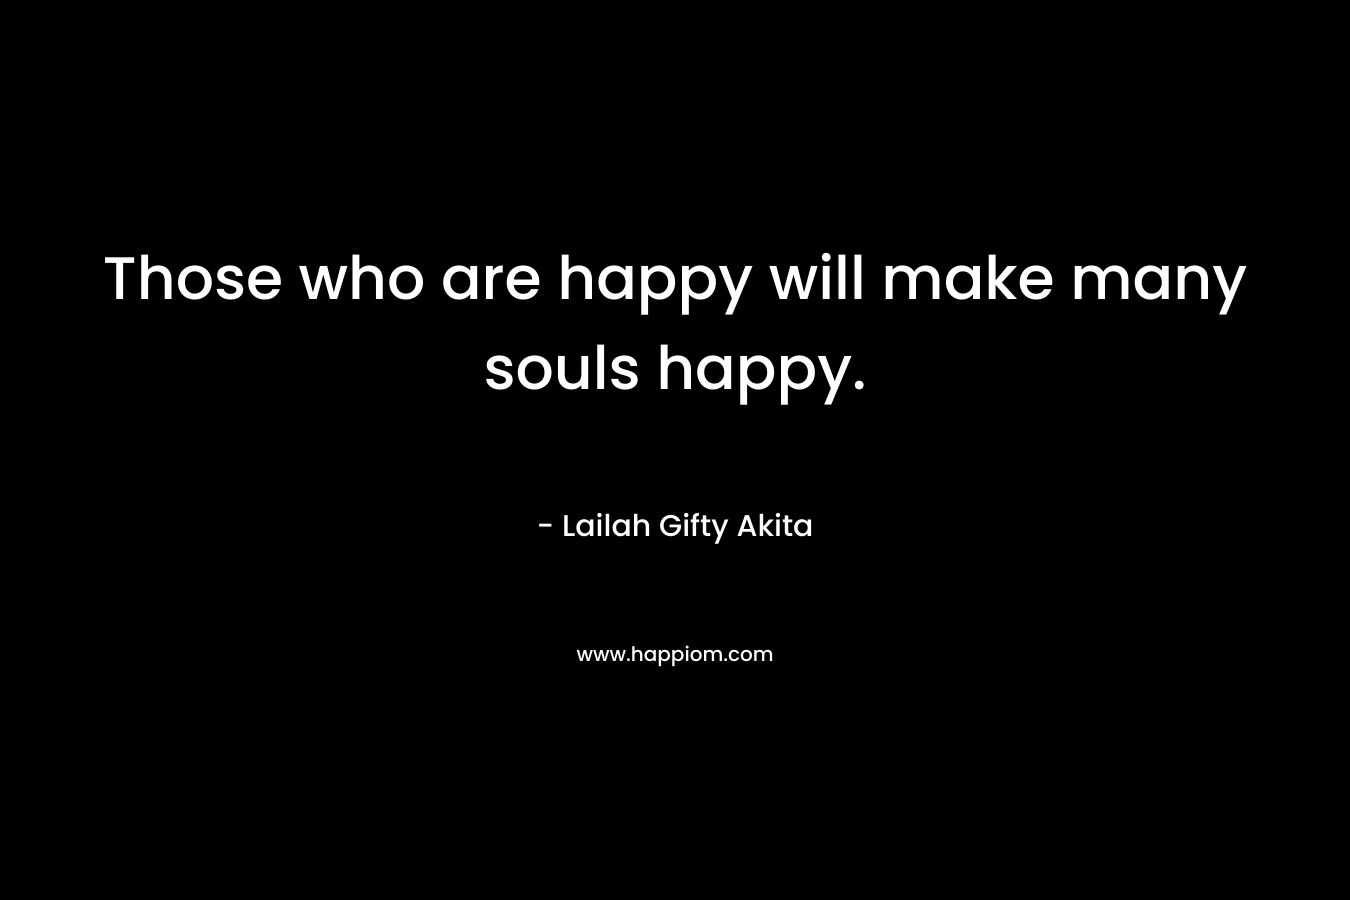 Those who are happy will make many souls happy.